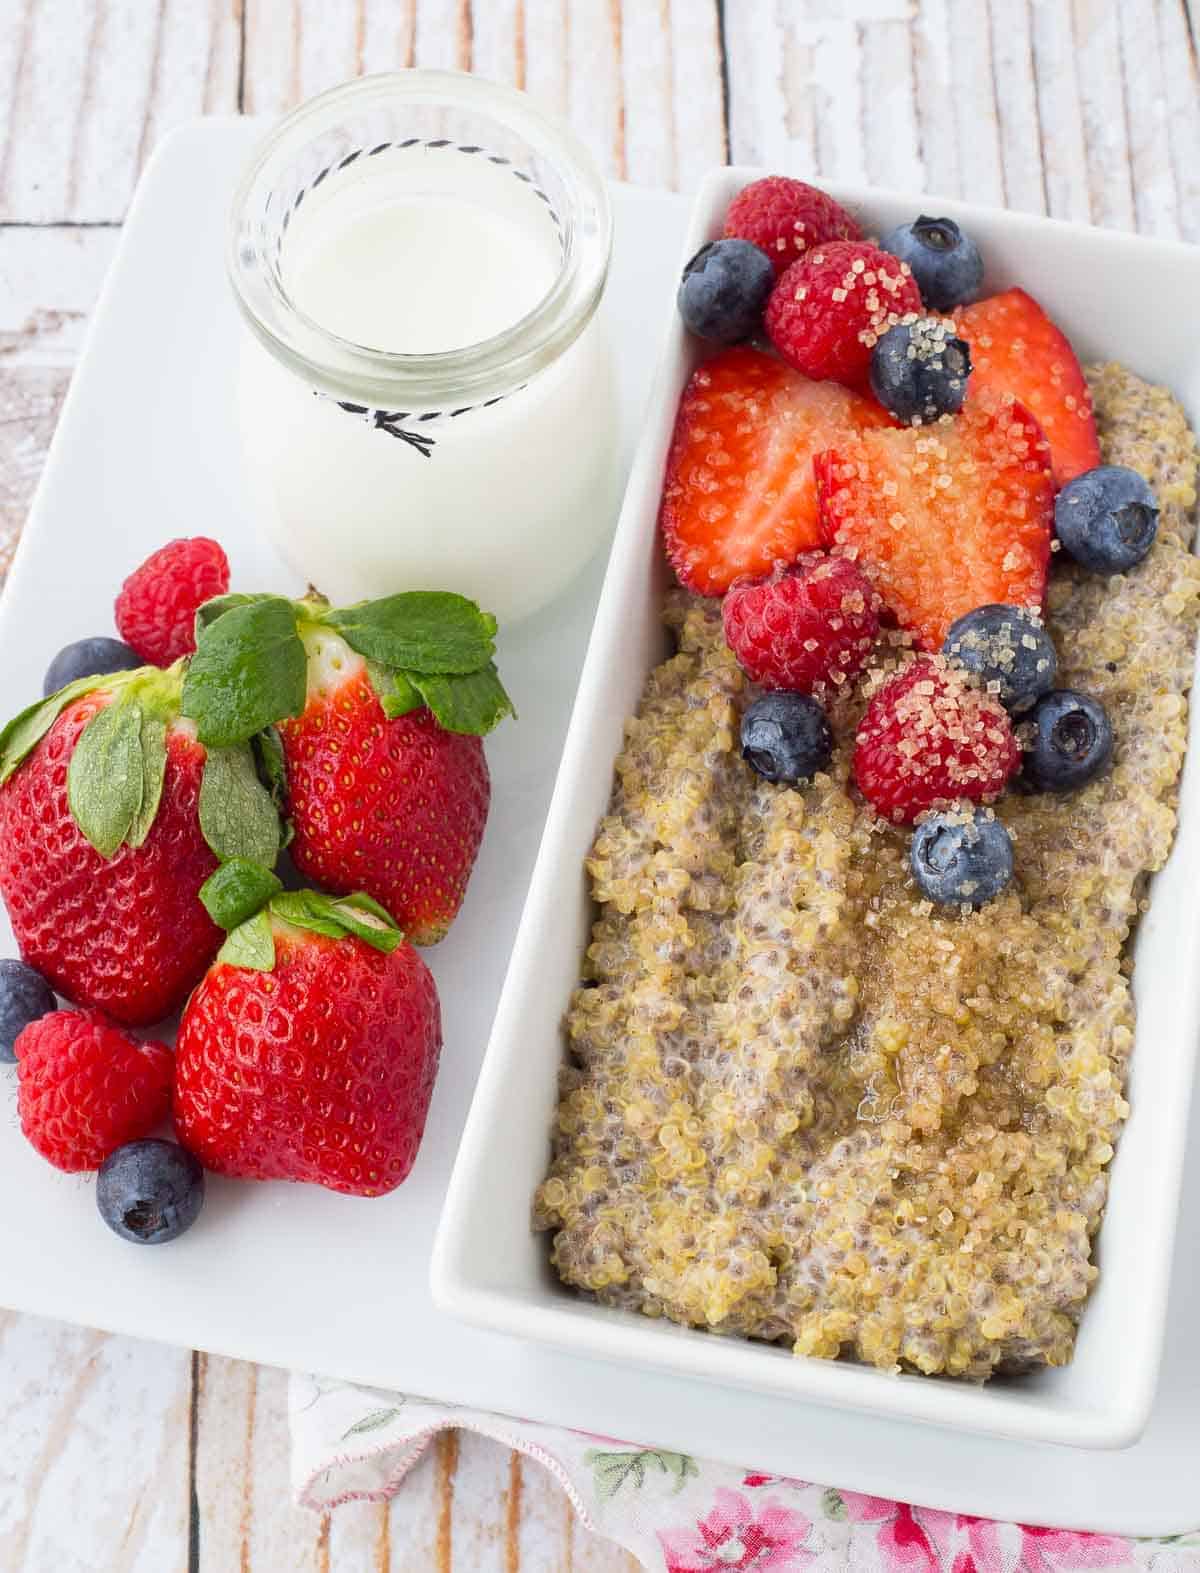 Looking for a filling and nutritious breakfast but slightly bored with oatmeal? You'll love this protein-packed breakfast quinoa! Have fun with toppings! Get the healthy breakfast recipe on RachelCooks.com!